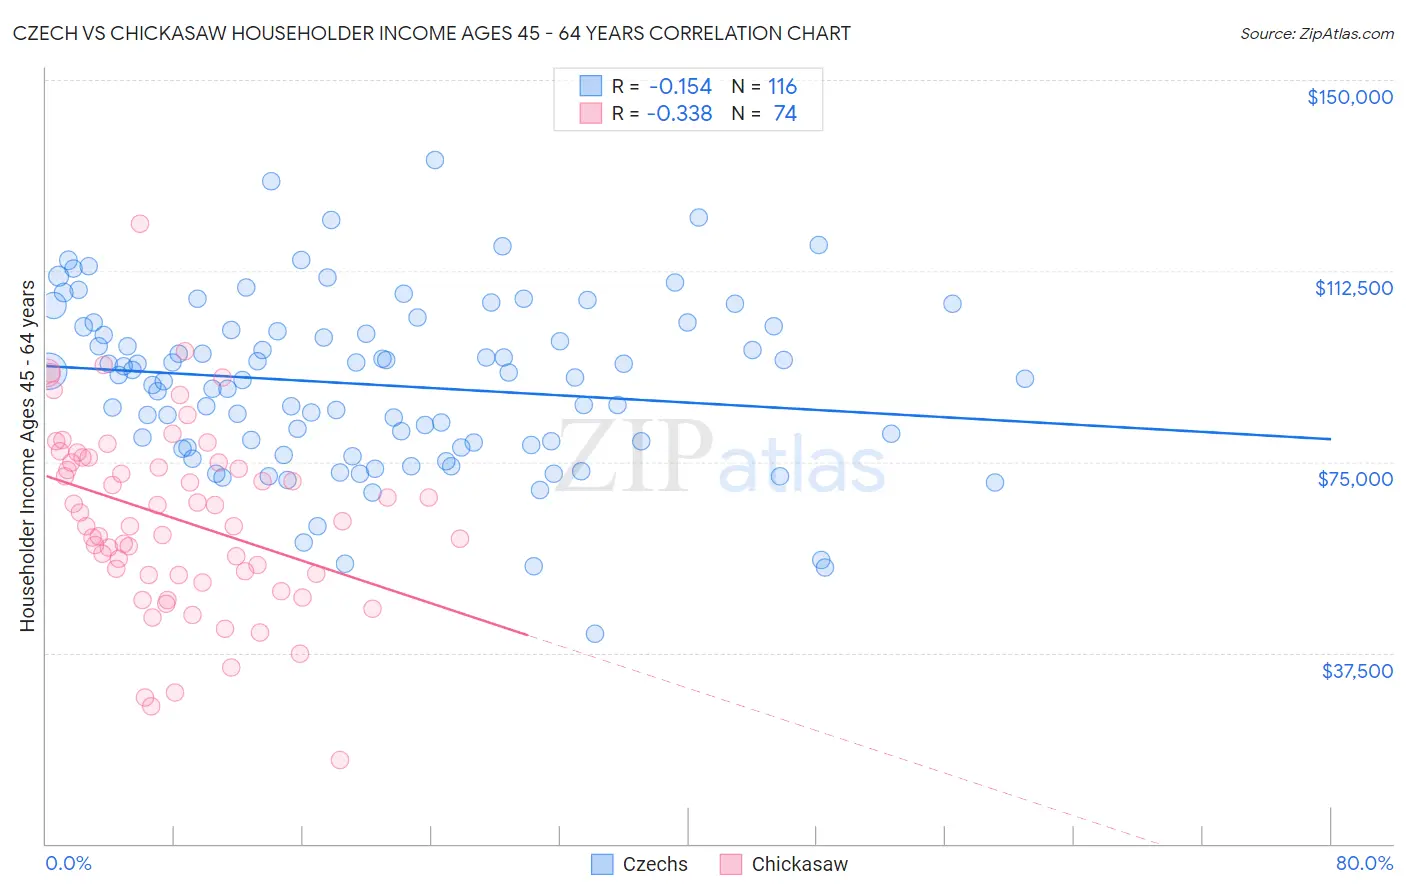 Czech vs Chickasaw Householder Income Ages 45 - 64 years